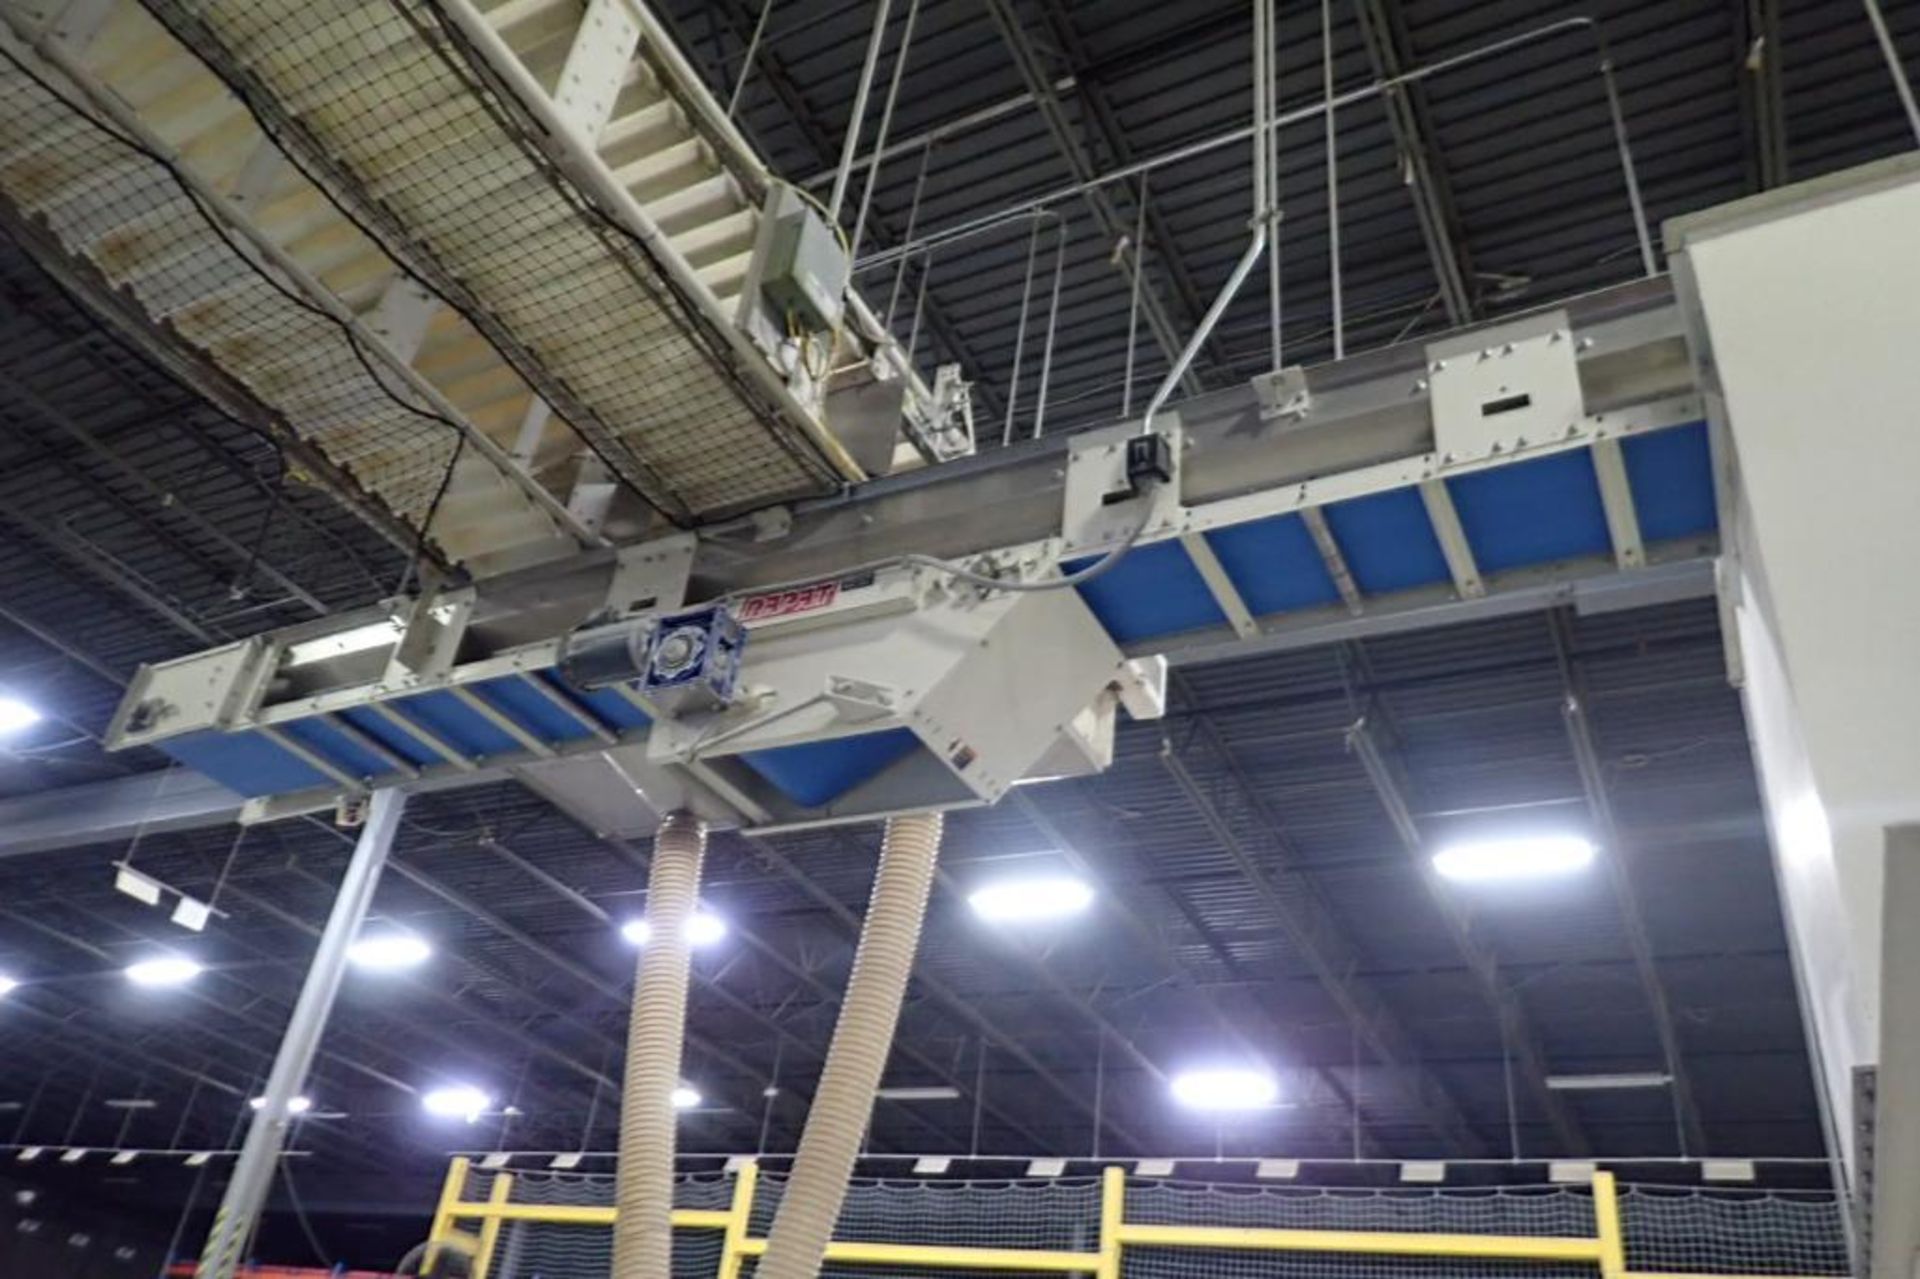 Rapat infeed conveyor, 20 ft. long x 24 in. wide, blue belt, motor and drive, suspended from ceiling